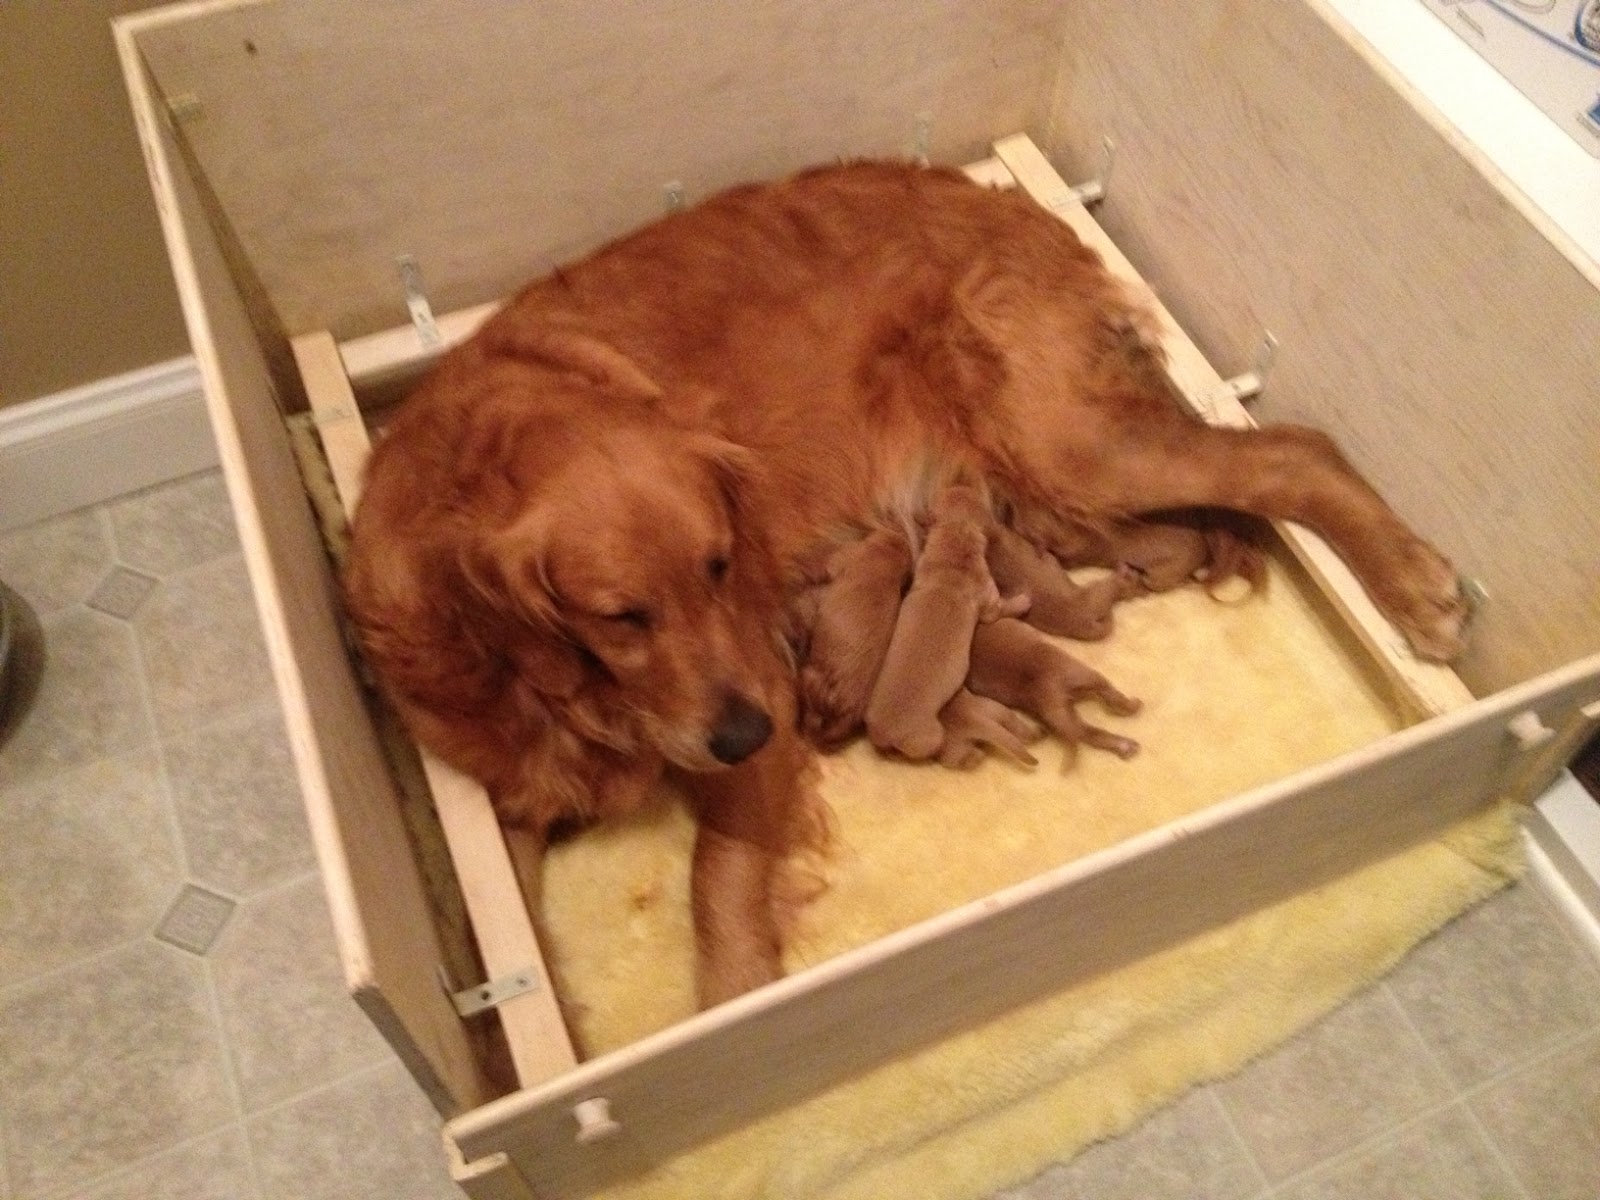 Brady lies down in her whelping box with her 6 golden retriever puppies. The puppies are only a few days old.